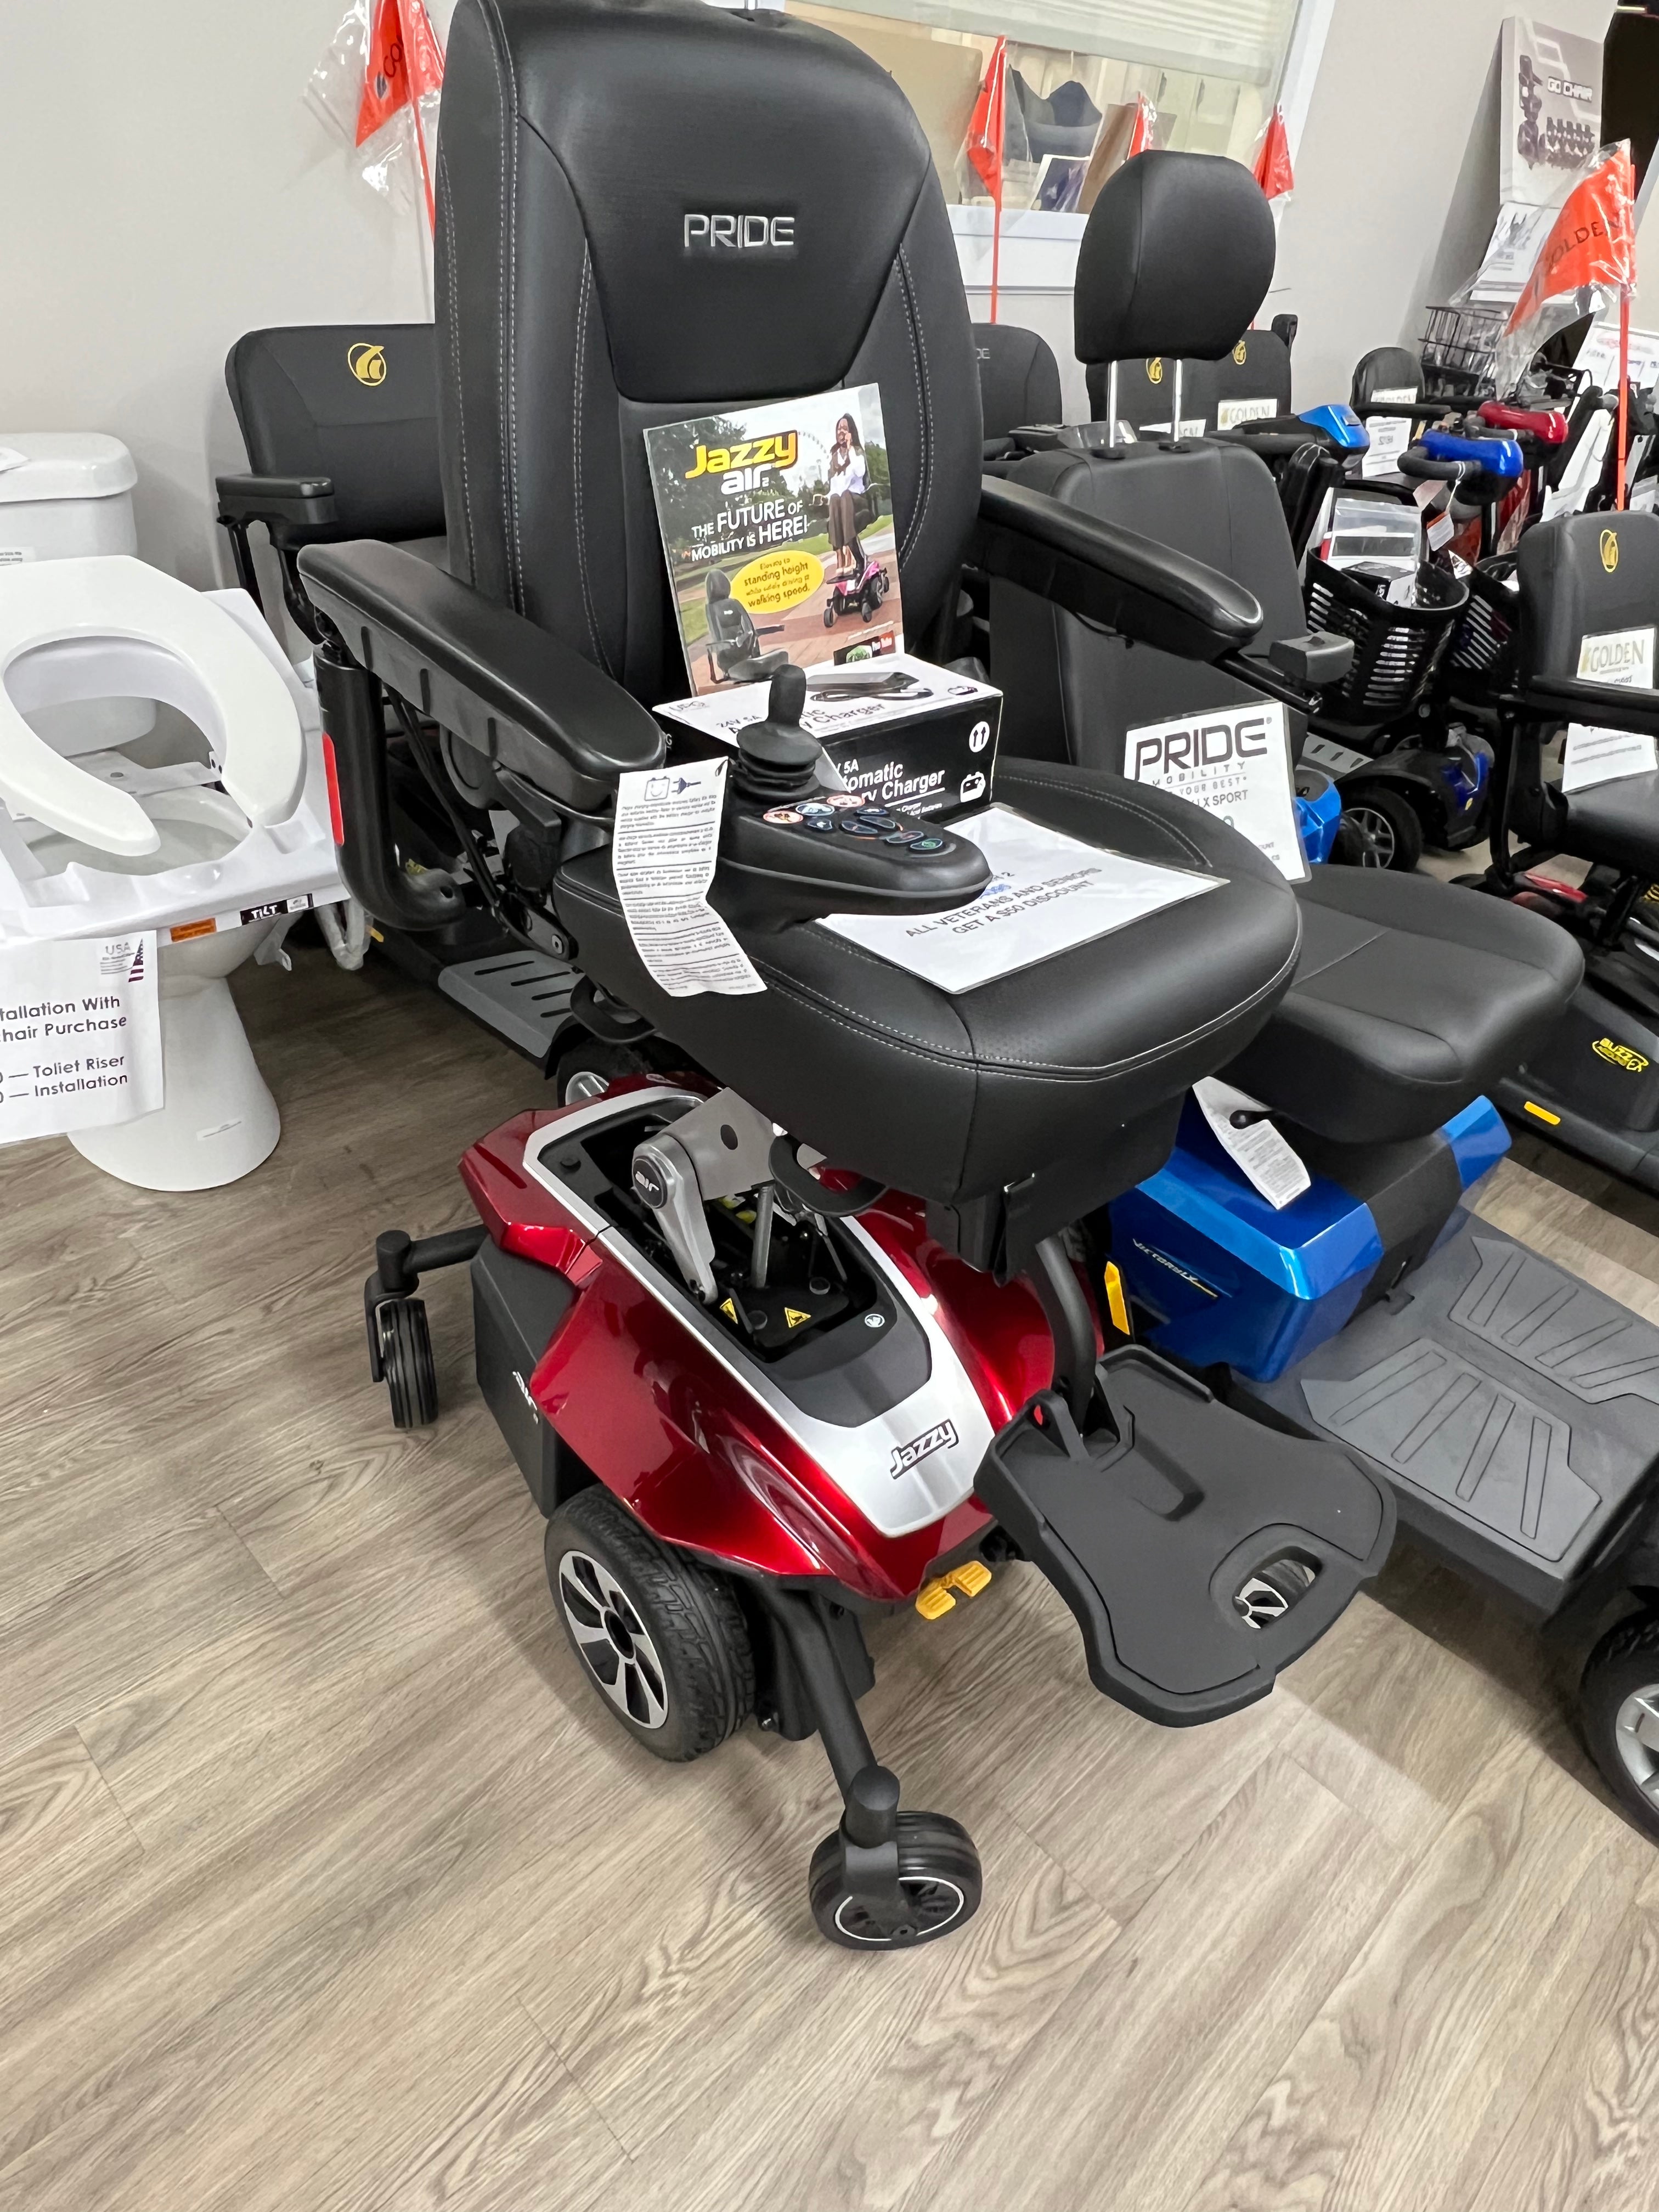 All About the Pride Air 2 Jazzy Power Wheelchair